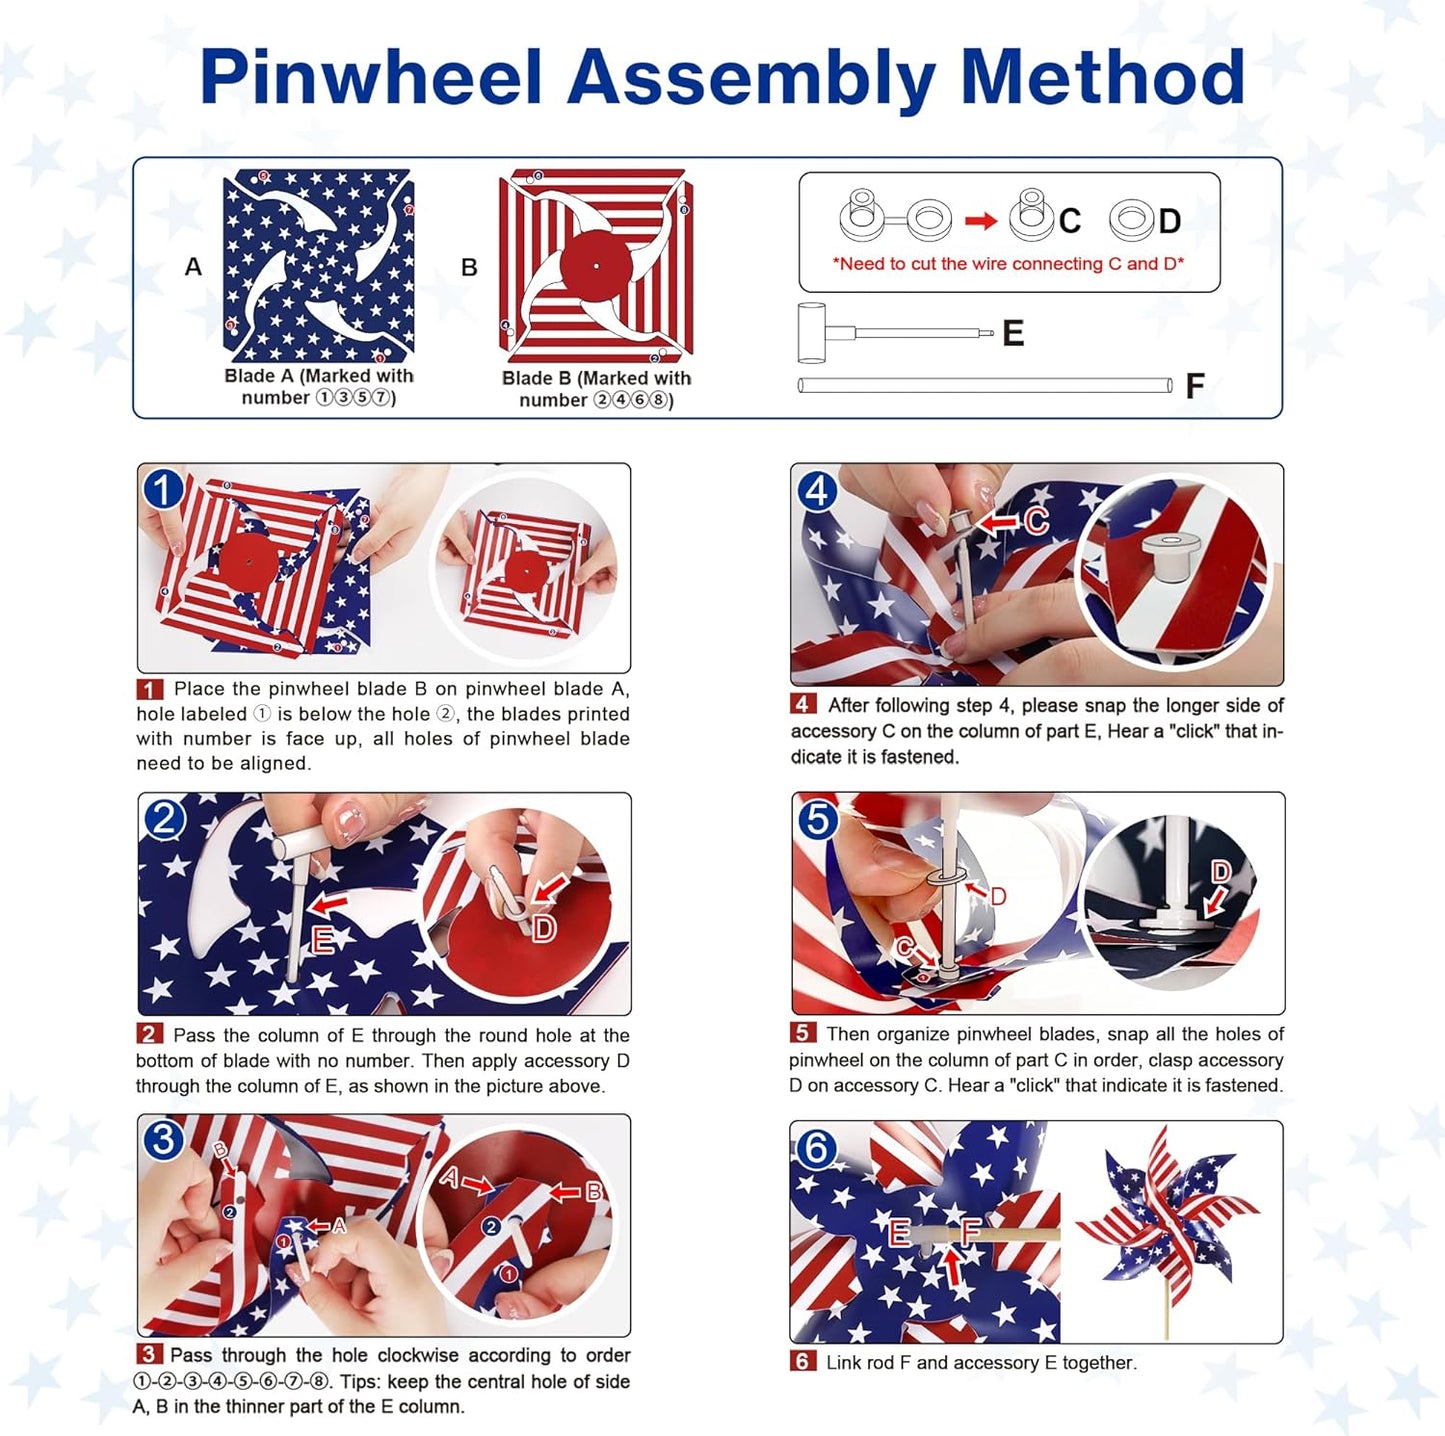 4Th of July Decorations American Flag Patriotic Pinwheels, 24 Pack Fourth of July Outdoor Decor Small Flags on Sticks with Yard Pinwheels,Red White and Blue Decor for Patriotic Party Supplies